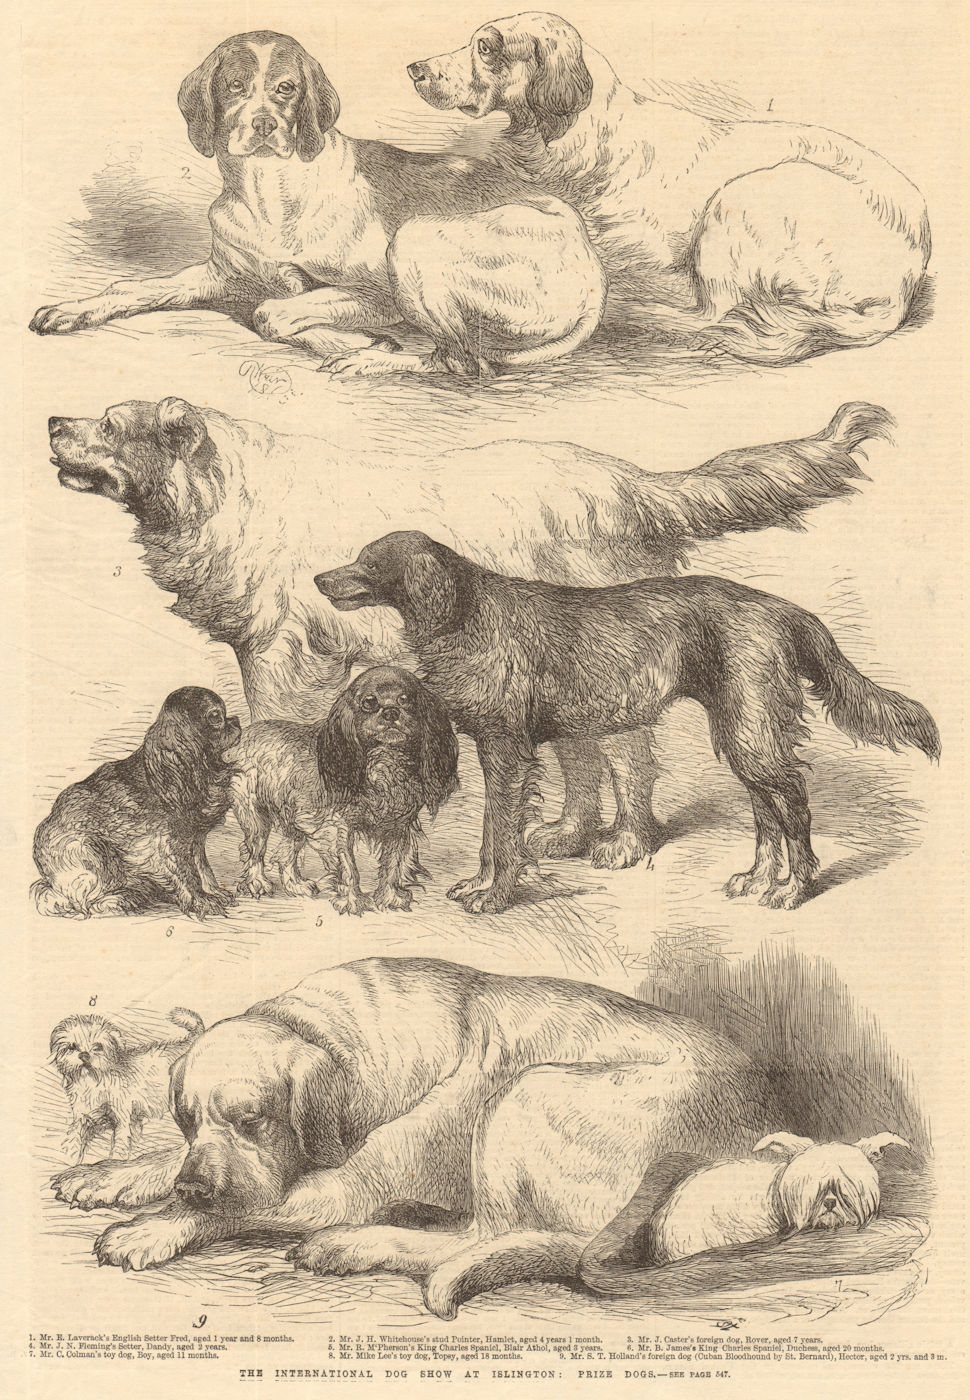 Associate Product The International Dog Show at Islington: prize dogs. London 1865 ILN full page